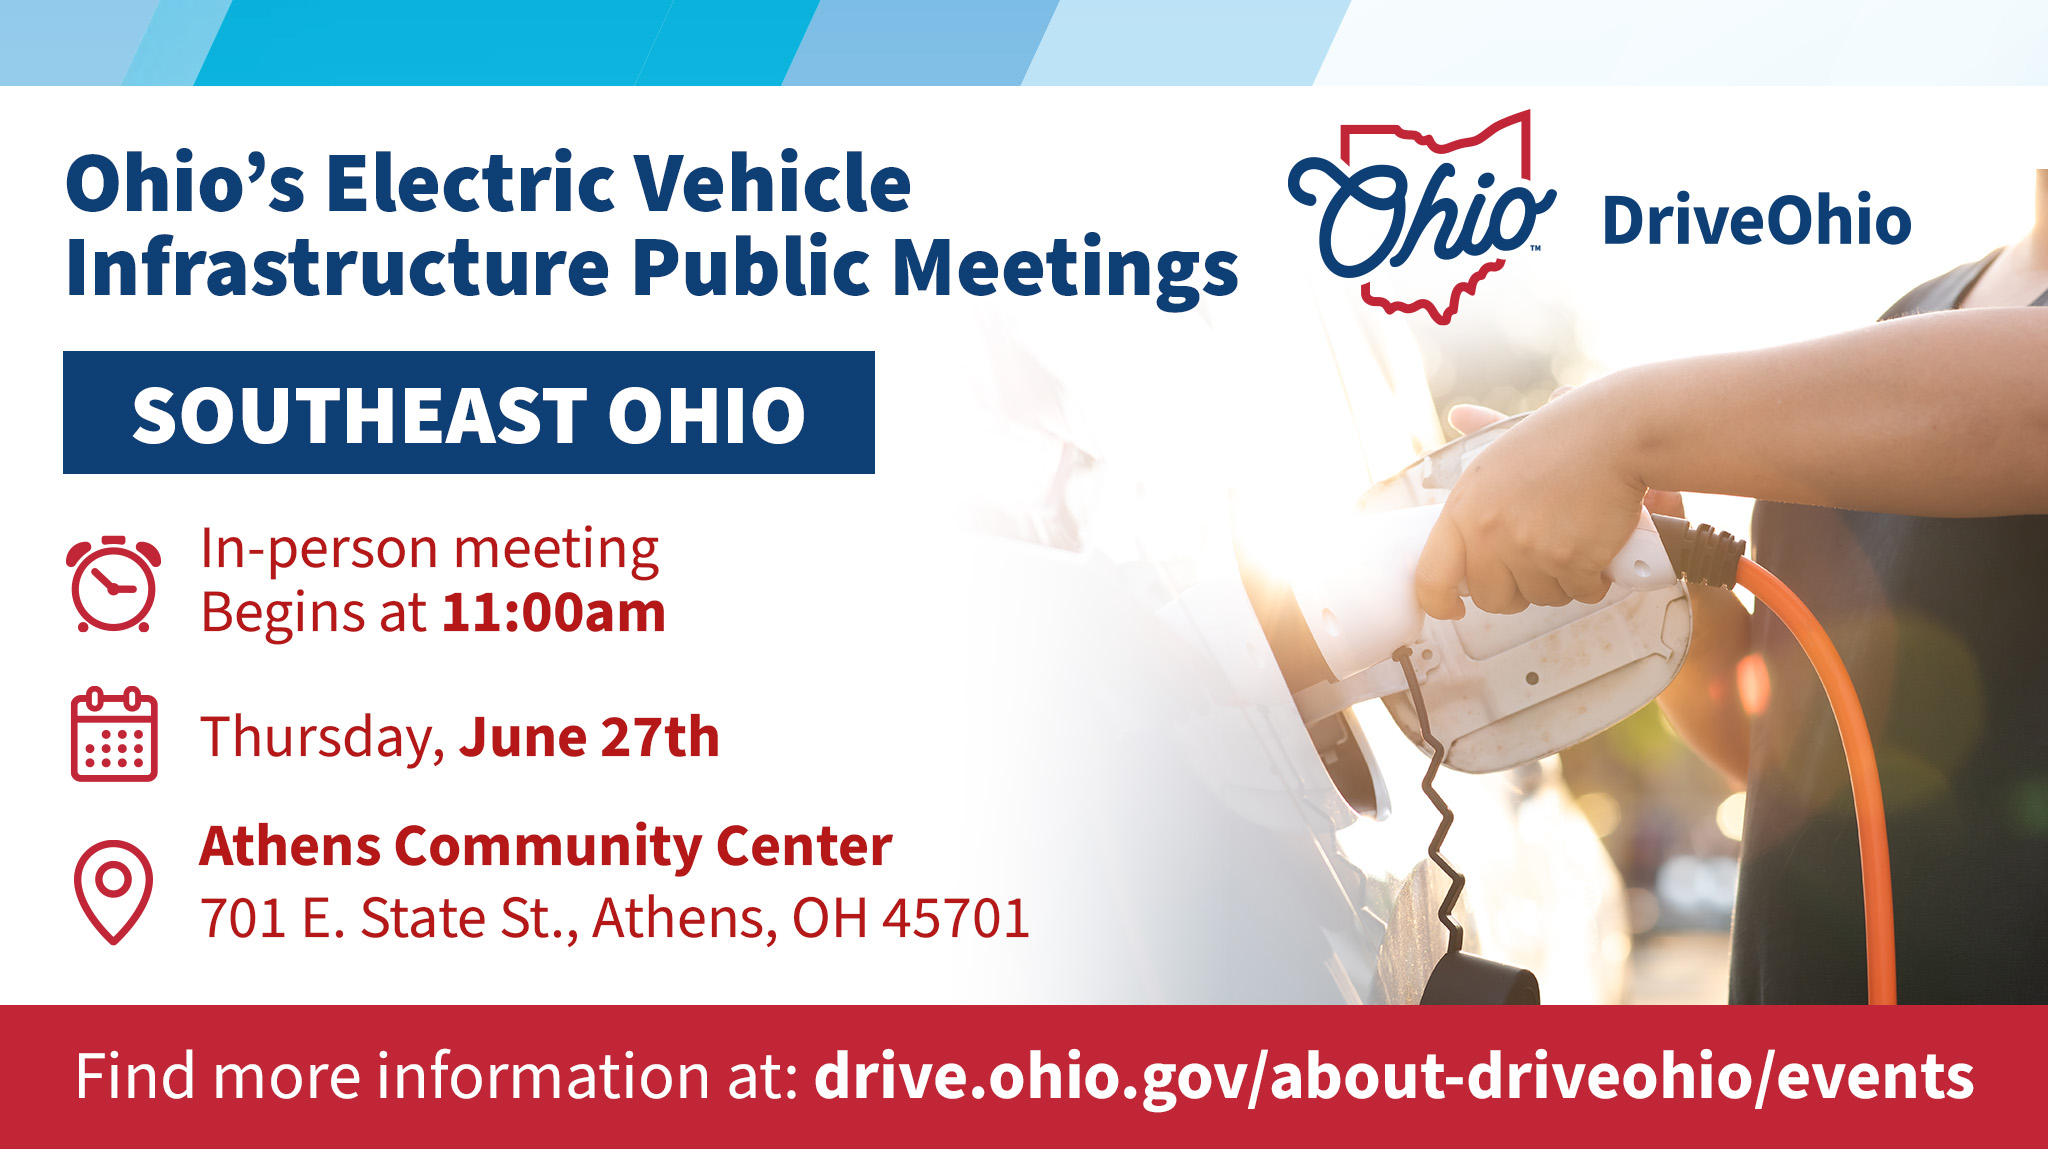 The Electric Vehicle Infrastructure Outreach Meeting for Southeast Ohio takes place 11:00 a.m. June 27 at the Athens Community Center.